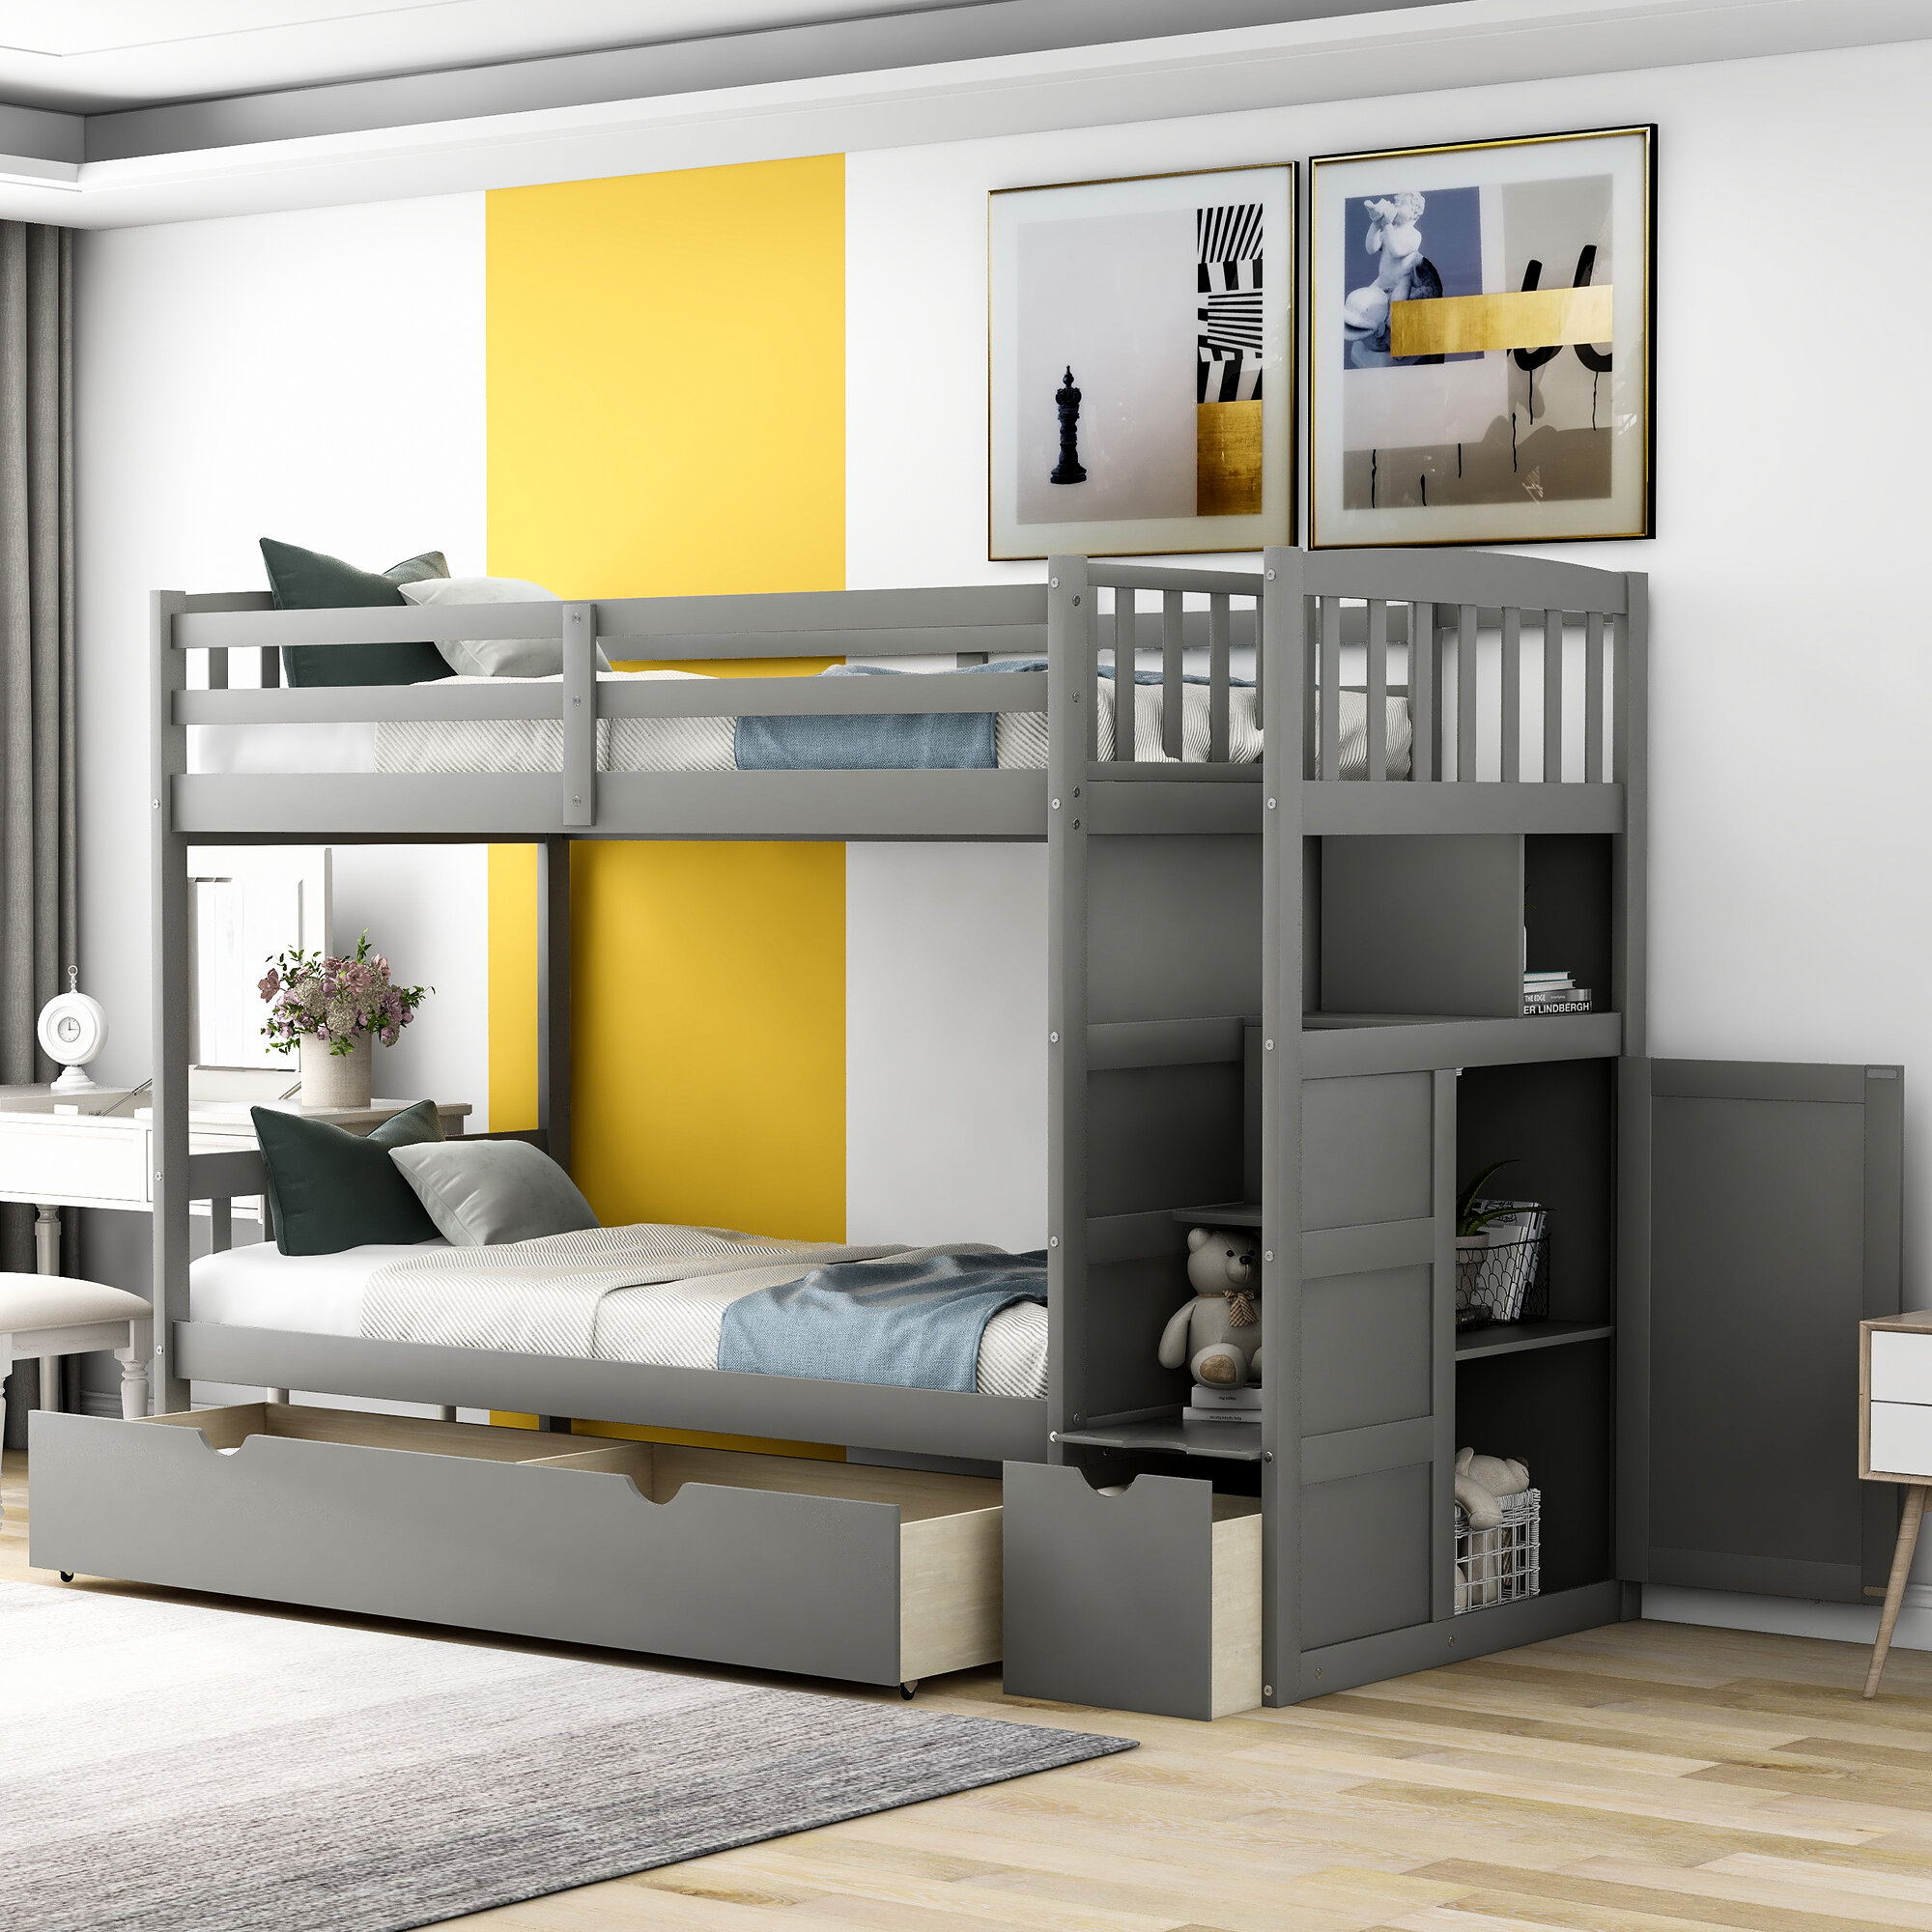 bunk bed with storage on top